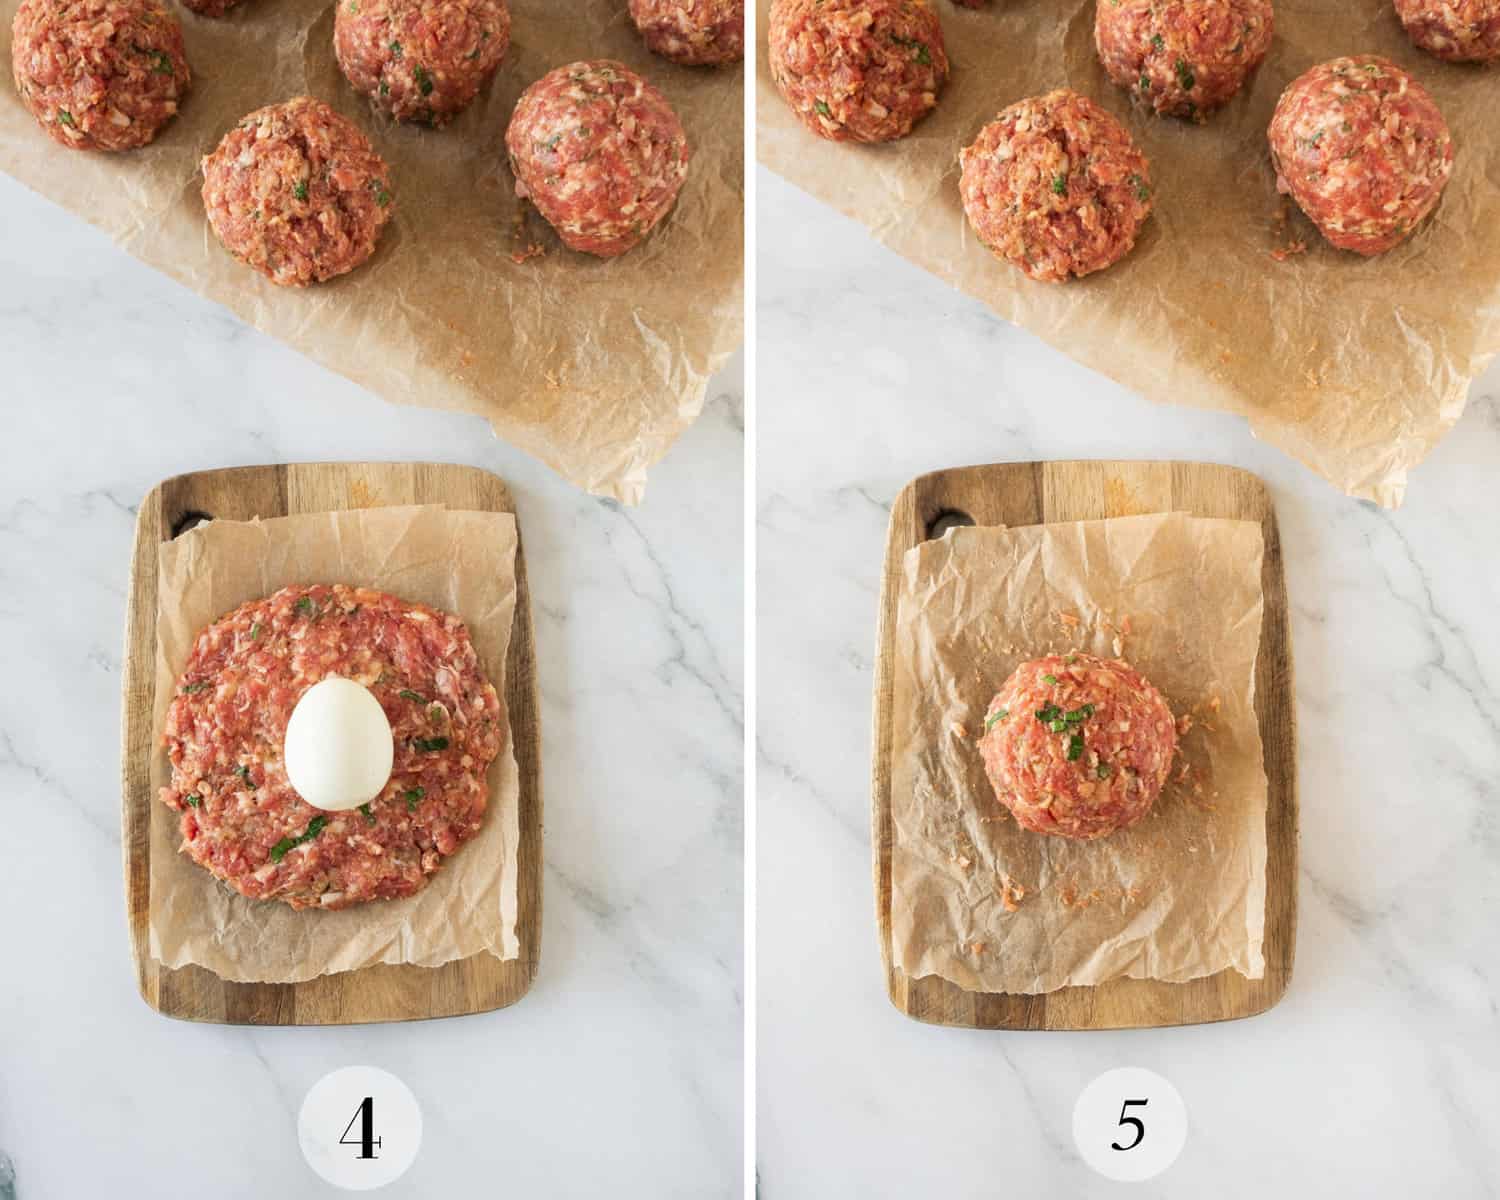 Process shots showing how to shape the meat around scotch eggs.